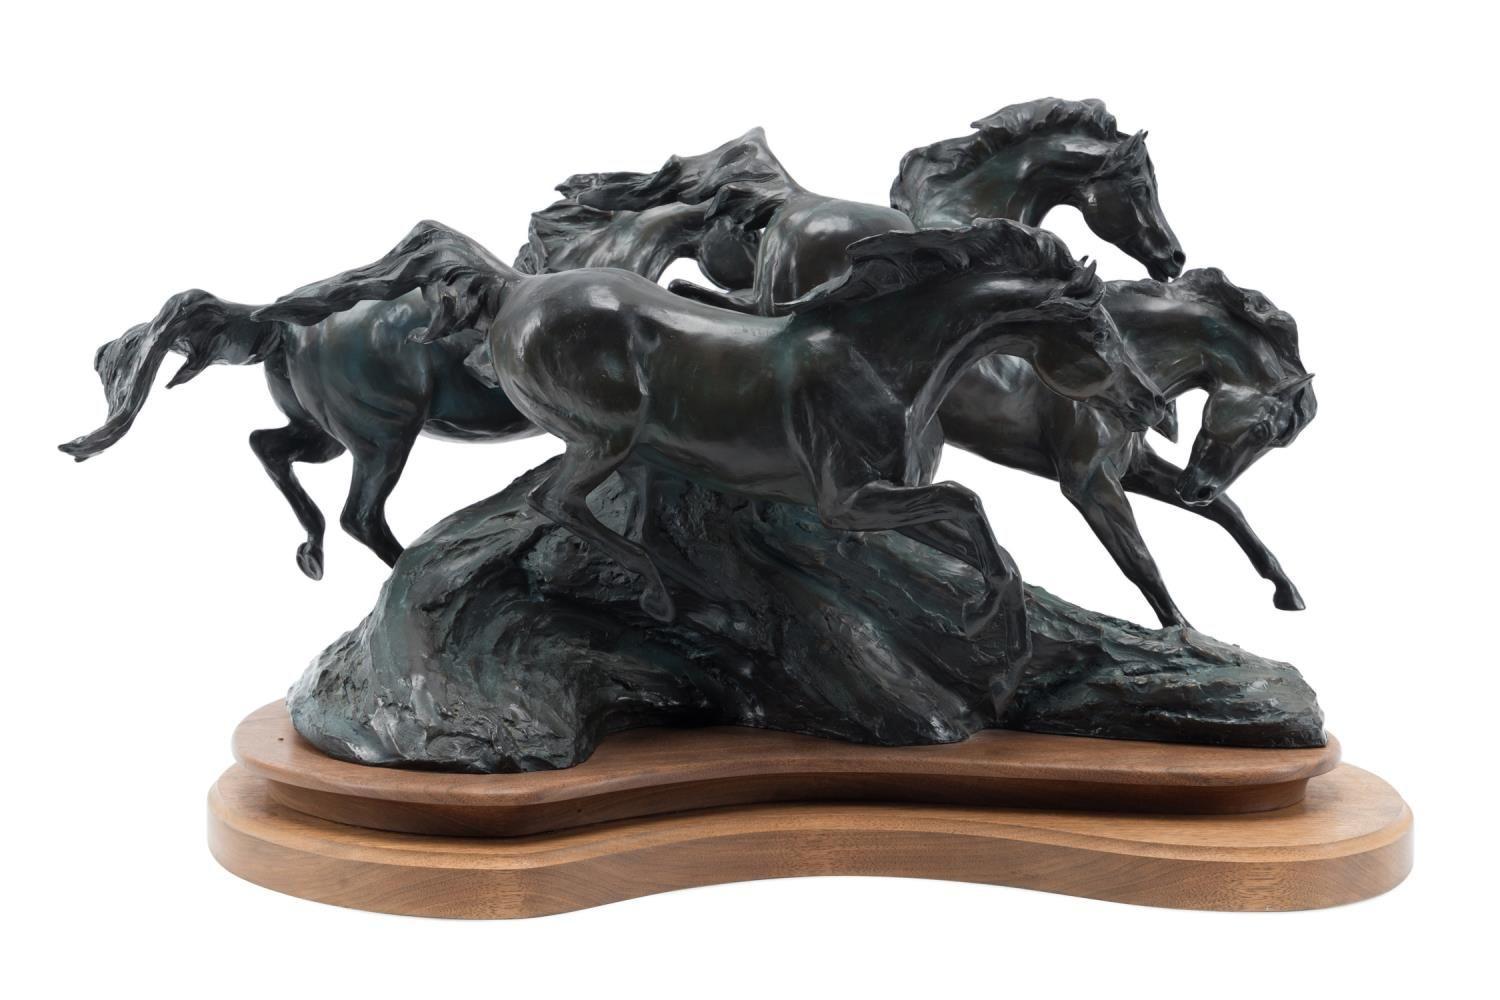 Presented is an original signed bronze sculpture by American artist Veryl Goodnight. The sculpture is called 